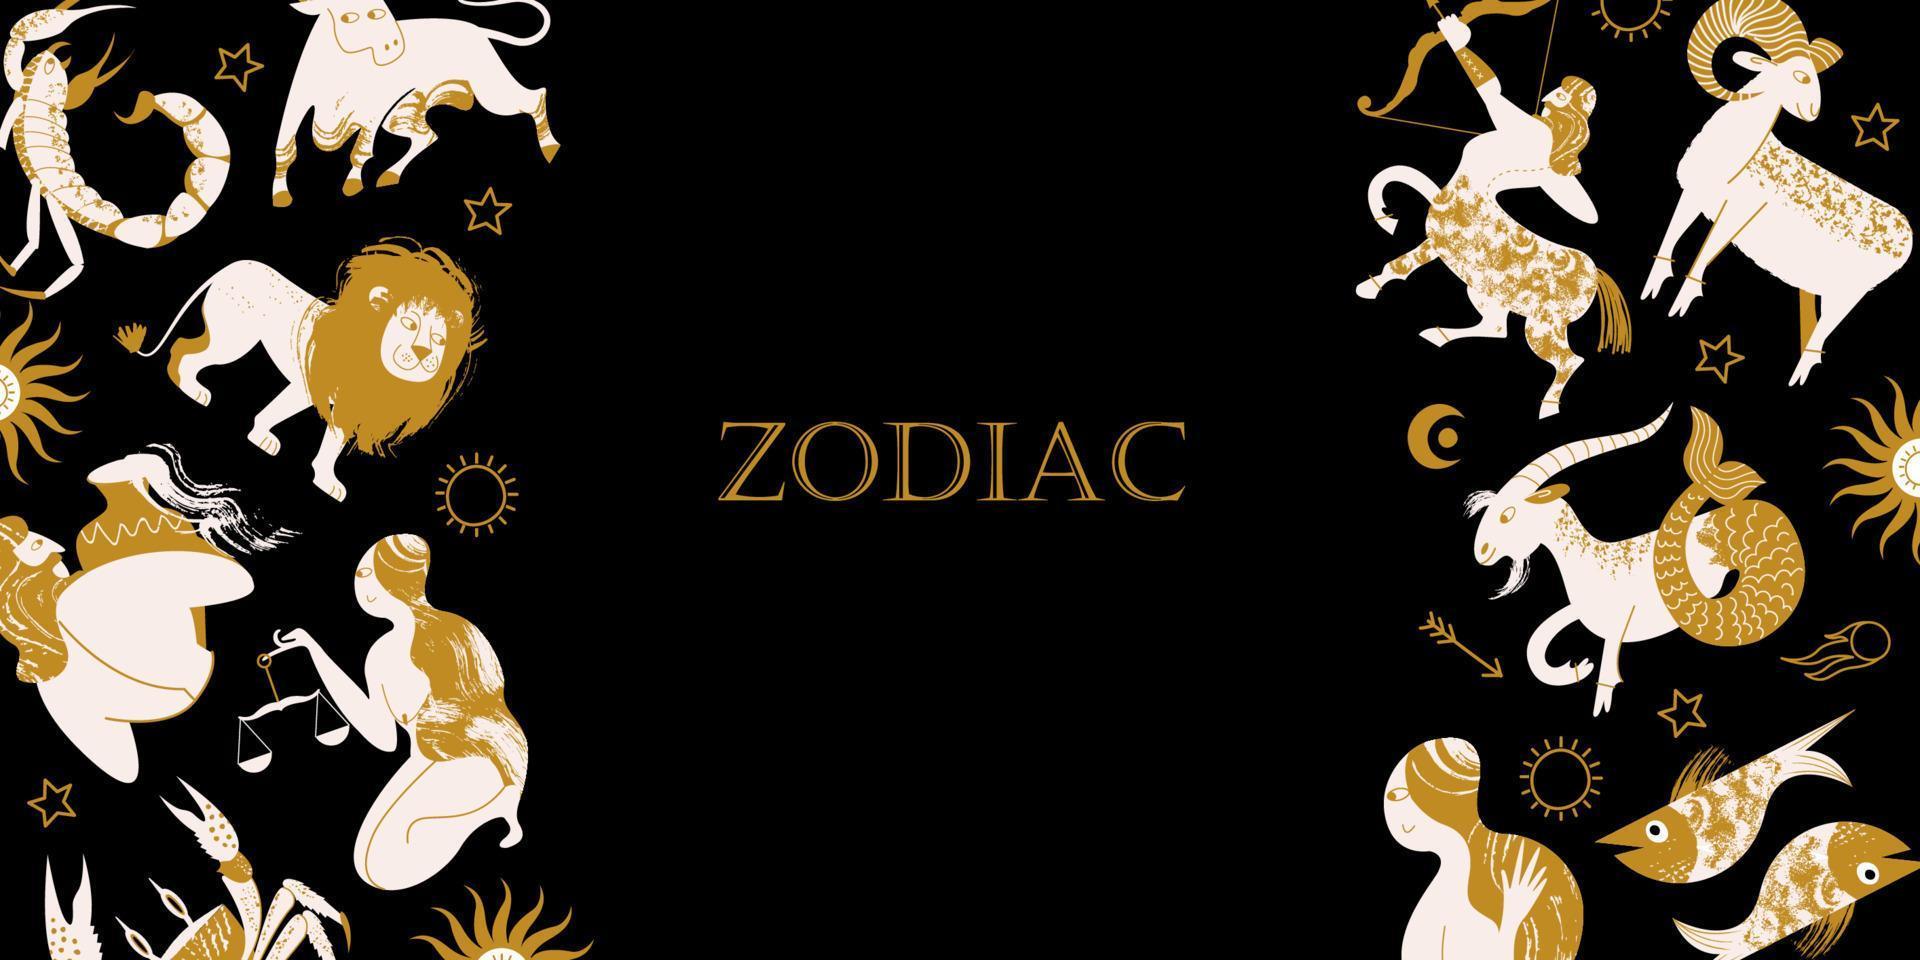 The signs of the zodiac, cosmic, esoteric symbols on a black background. Vector illustration.